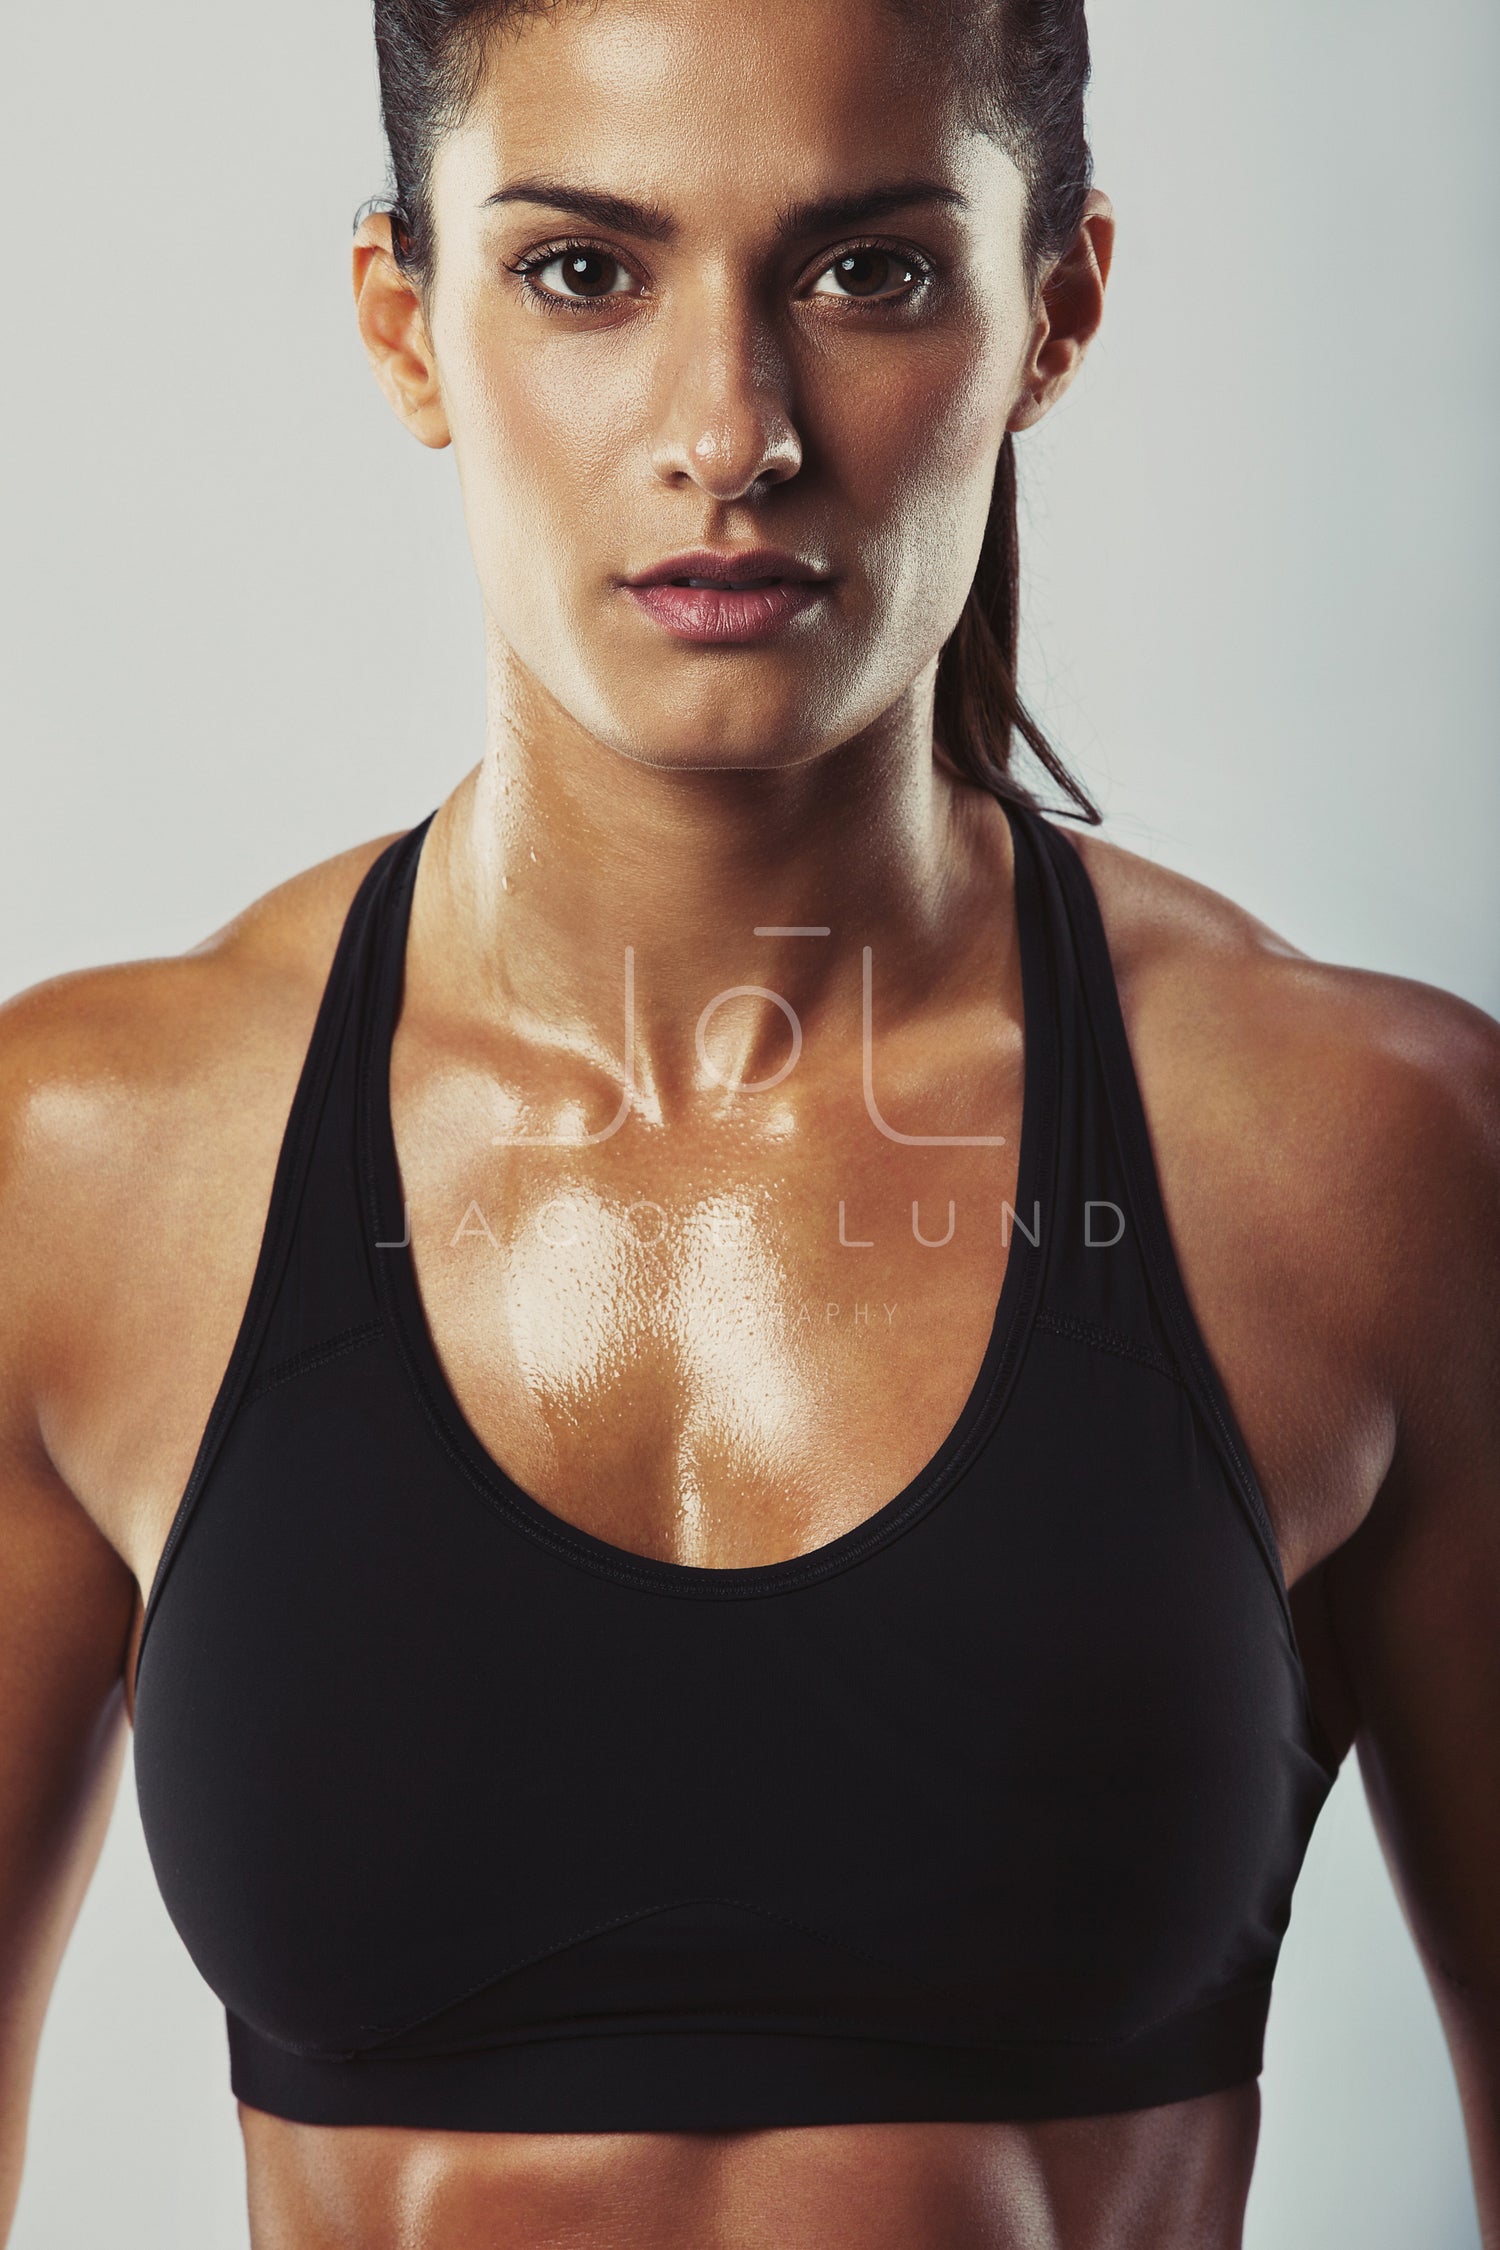 Free Photos - An Attractive Woman Wearing A Sports Bra, Posing In